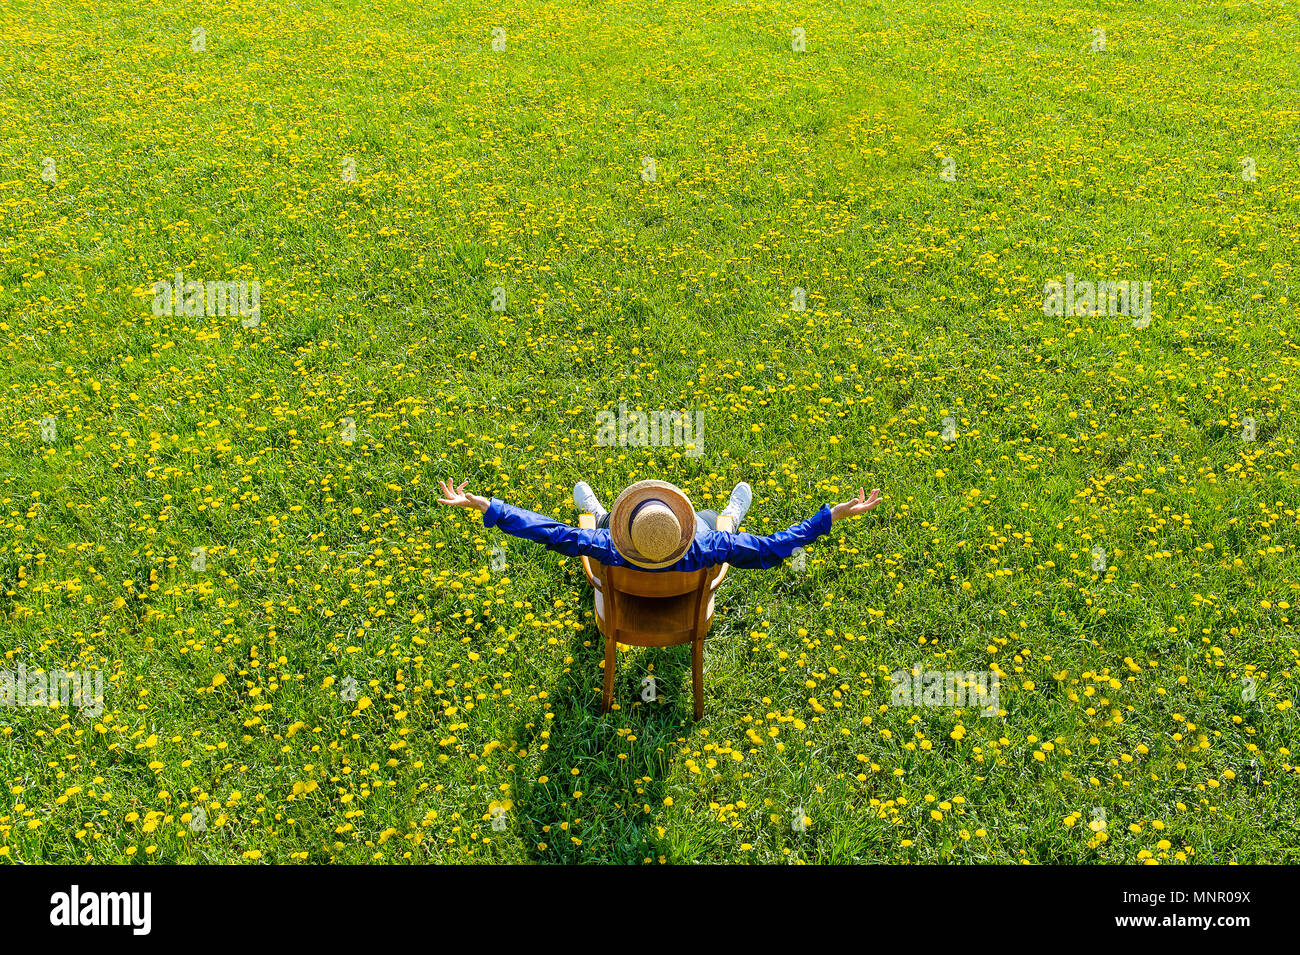 Spring Meadow with Dandelion, Woman with Straw Hat Leans on Chair, Bavaria, Germany Stock Photo